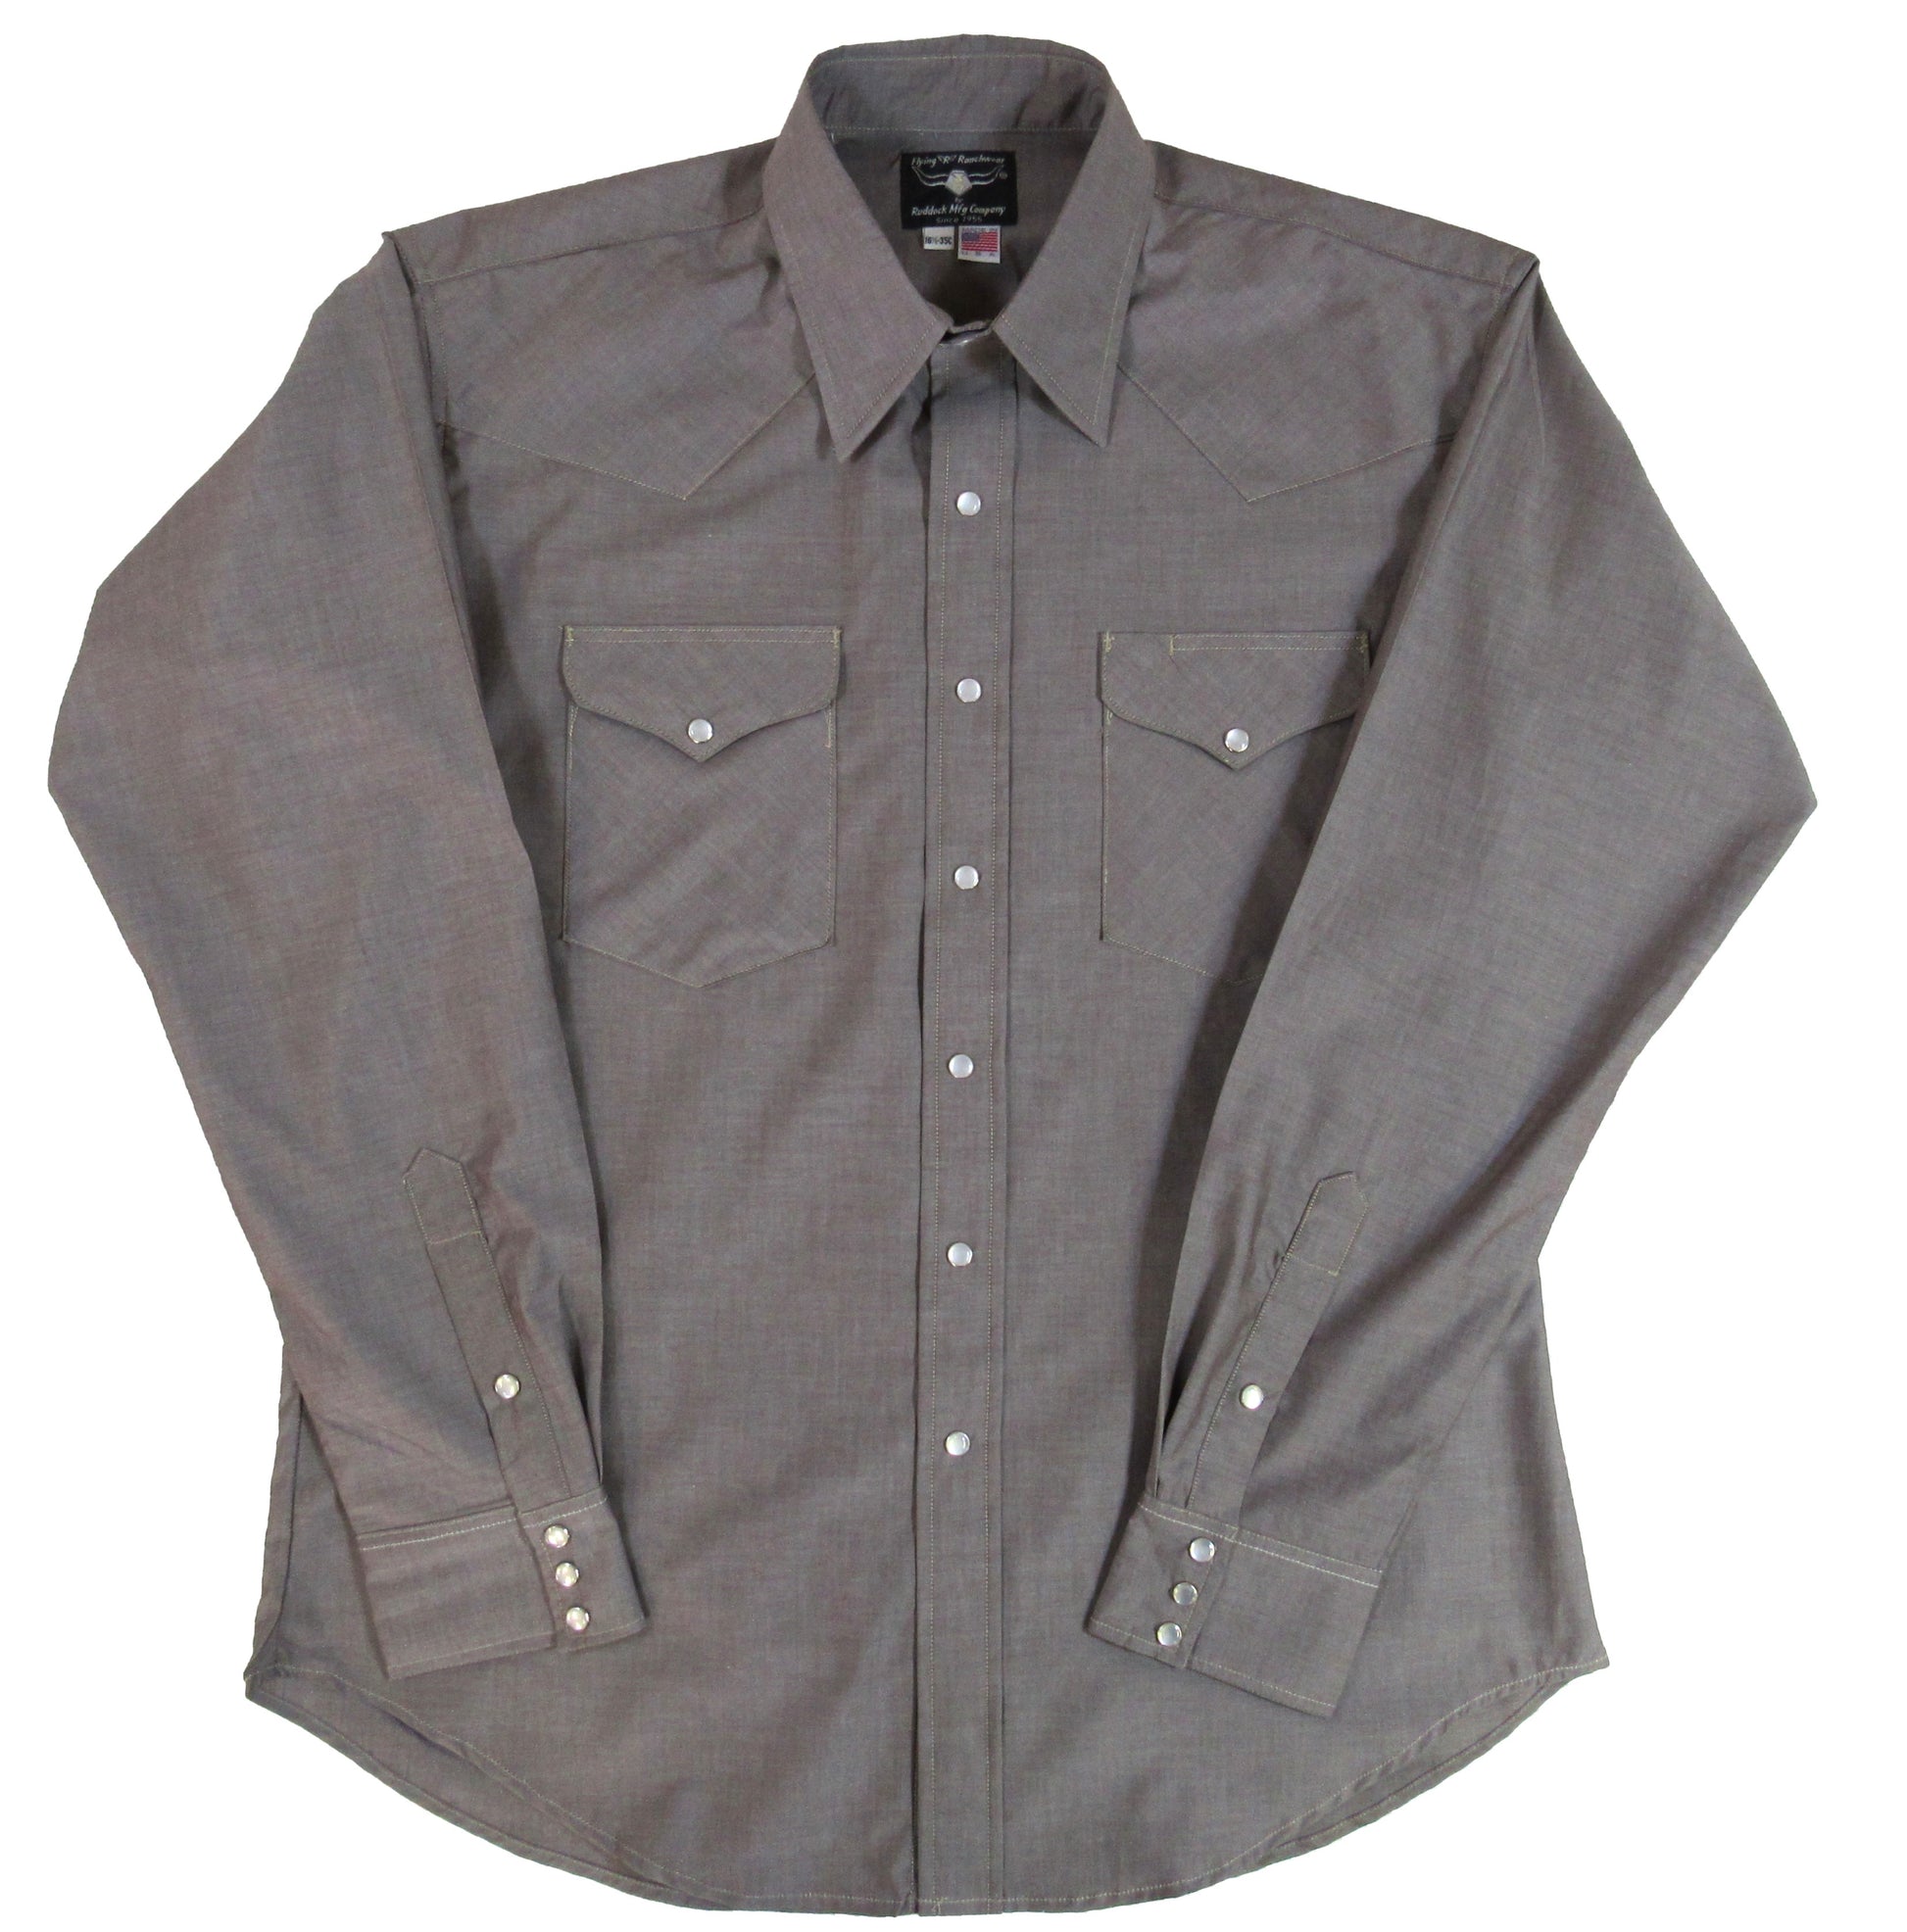 Sierra chambray in mocha by Flying R Ranchwear Made in USA with snaps